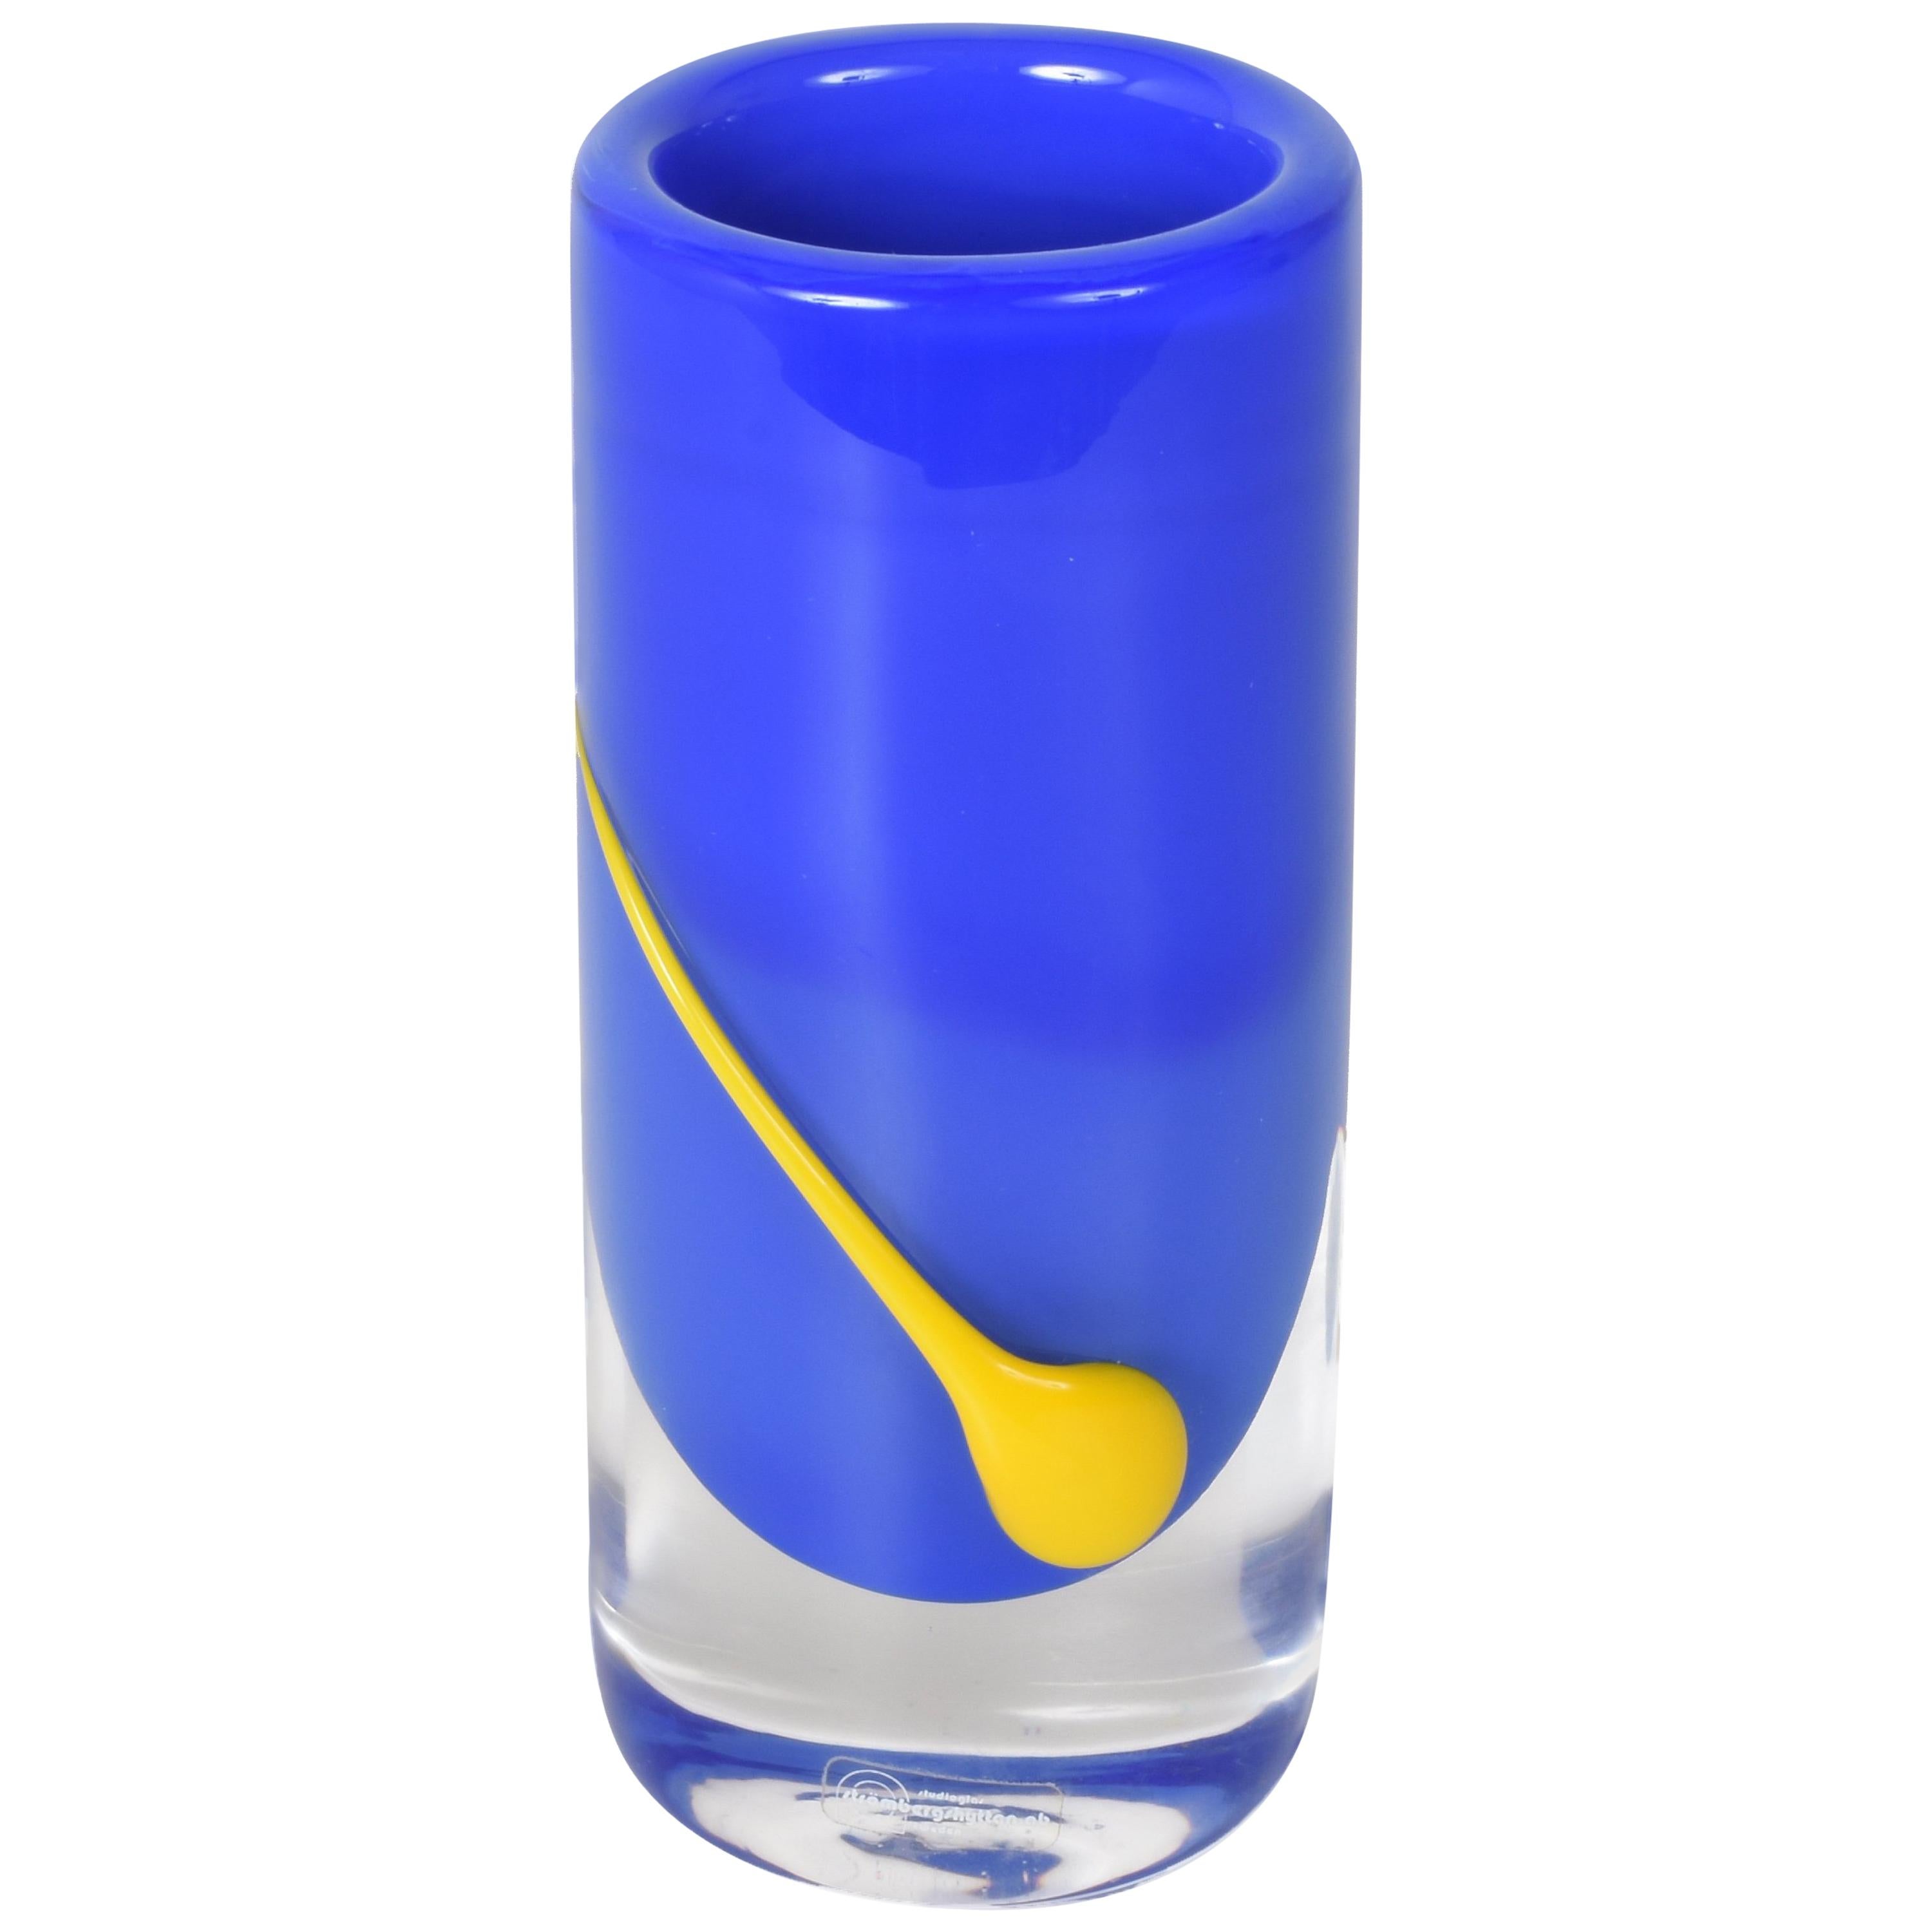 Vase by Stombergs Hyttan, Glass Blue and Yellow, Sweden Crystal Strombergshyttan For Sale